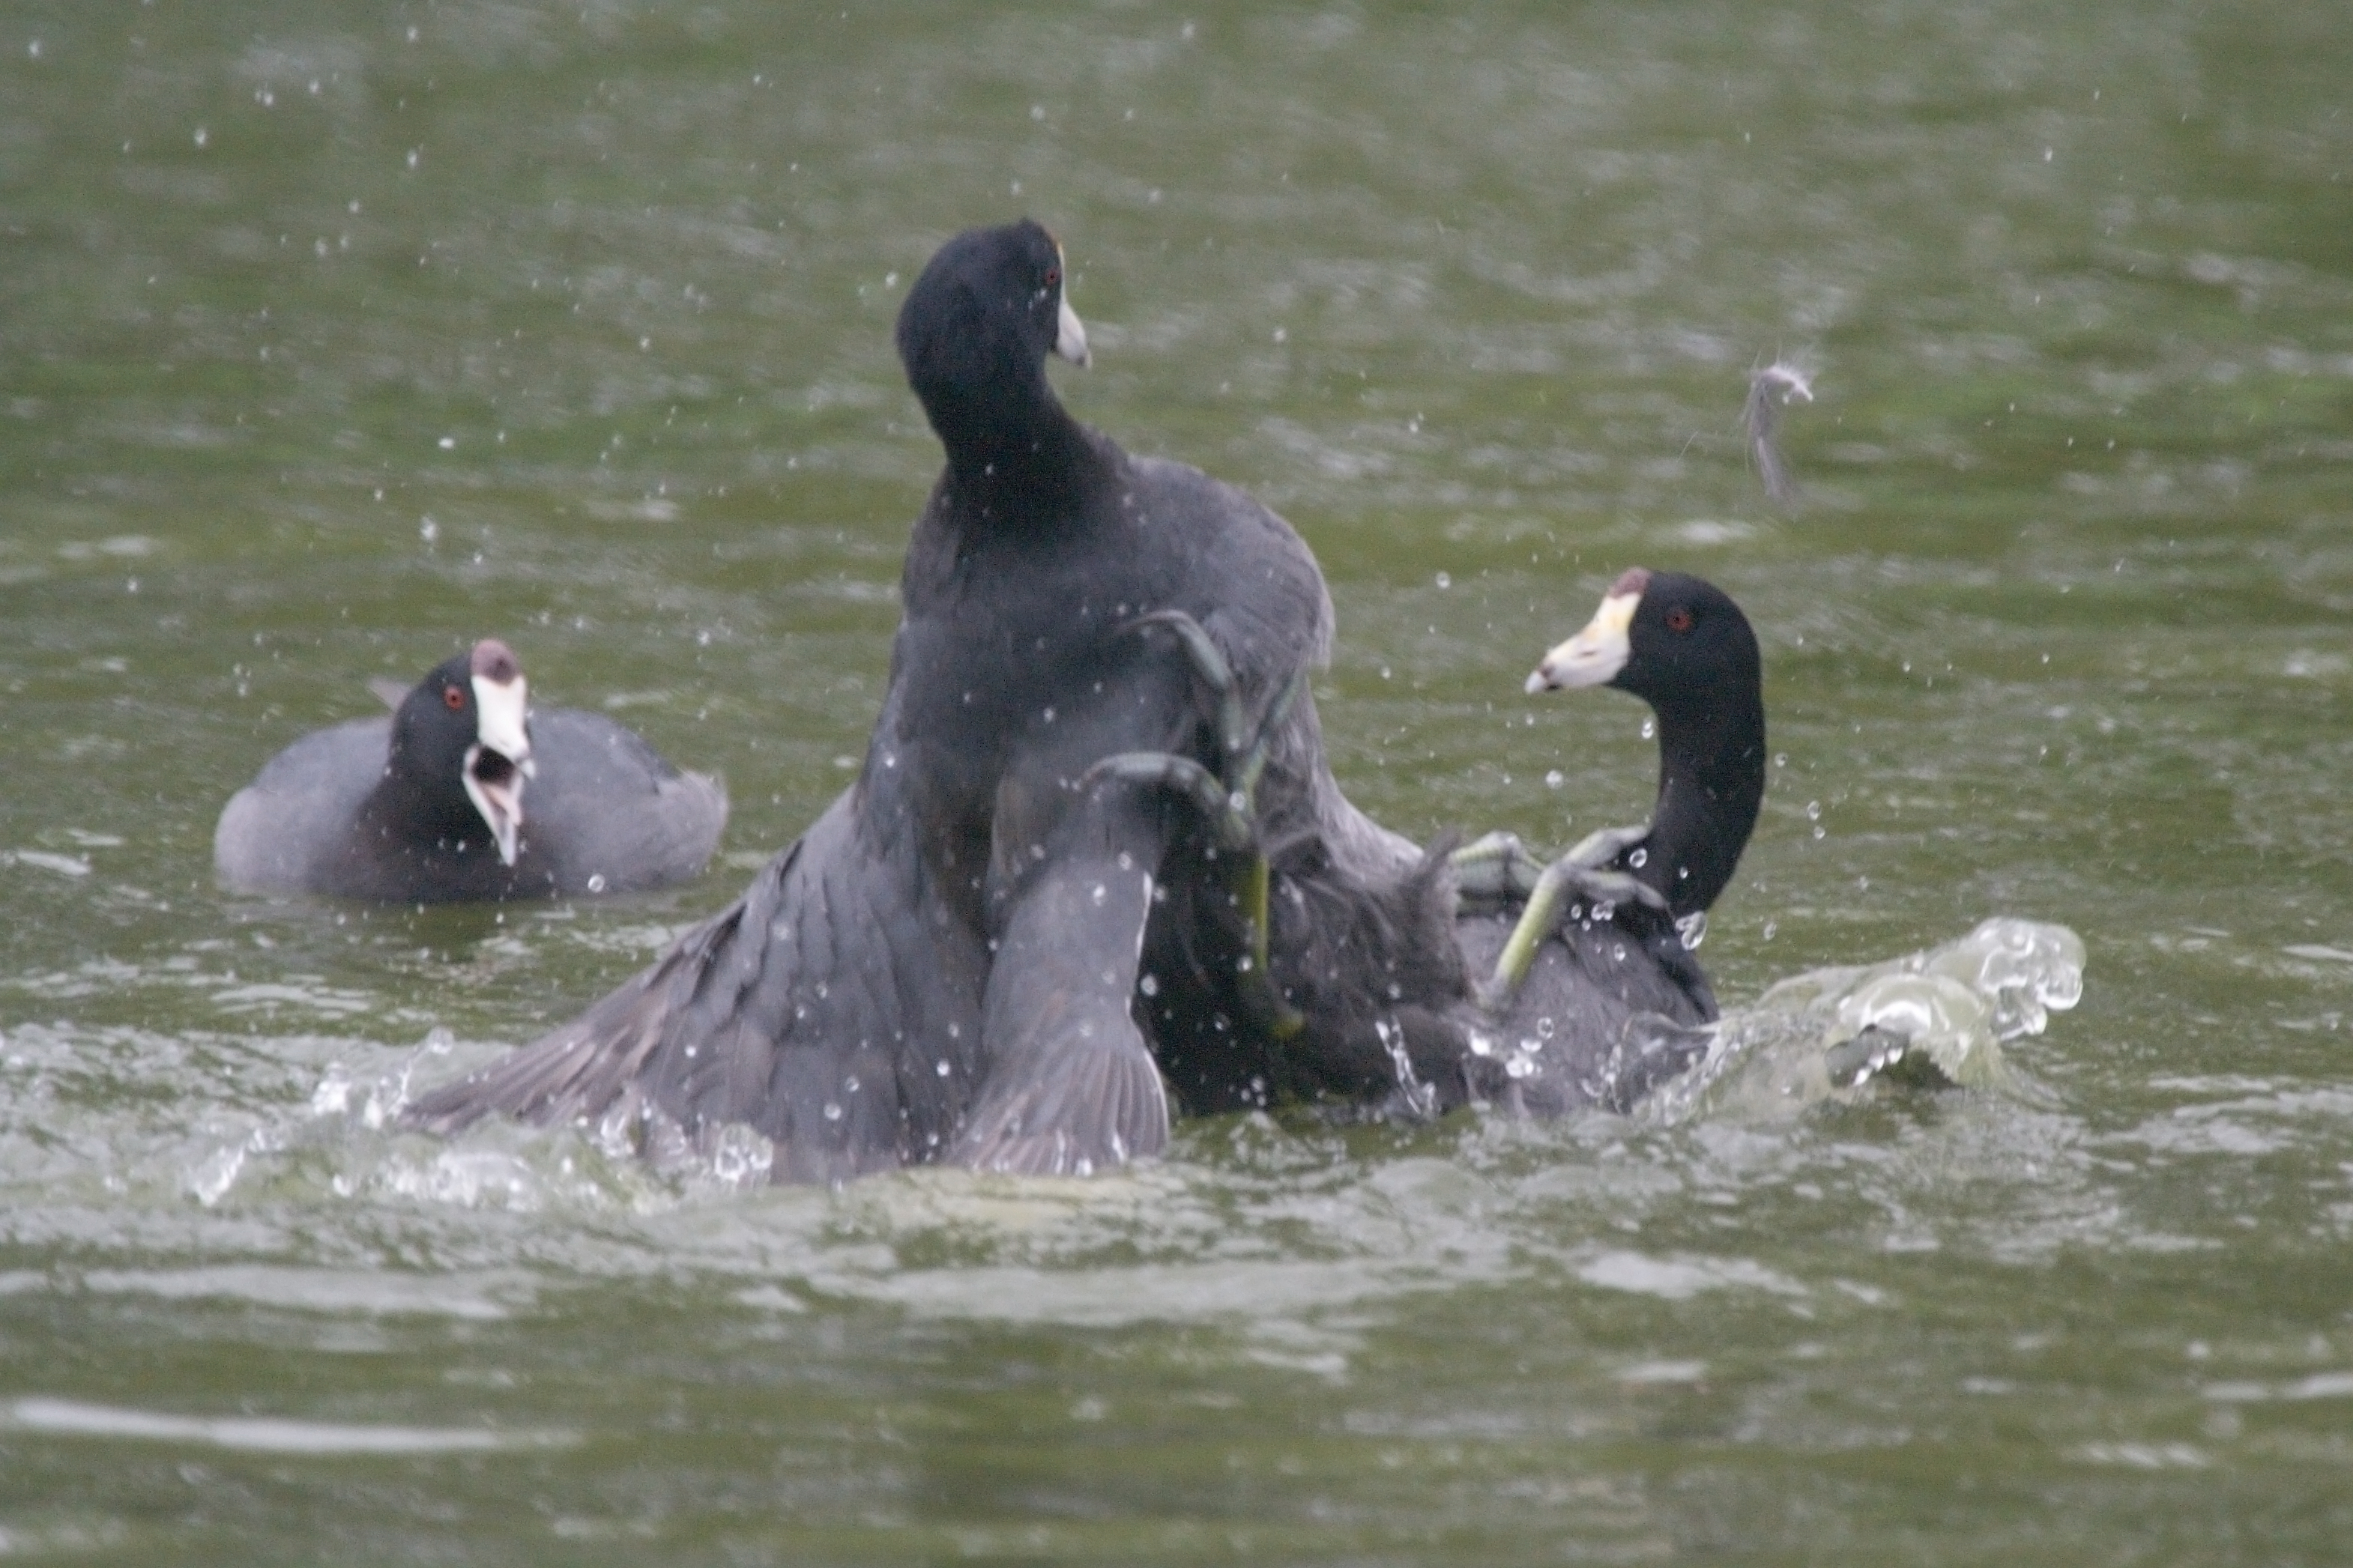 American Coots fighting with their feet in the water from http://www.flickr.com/photos/lucina/255341512/